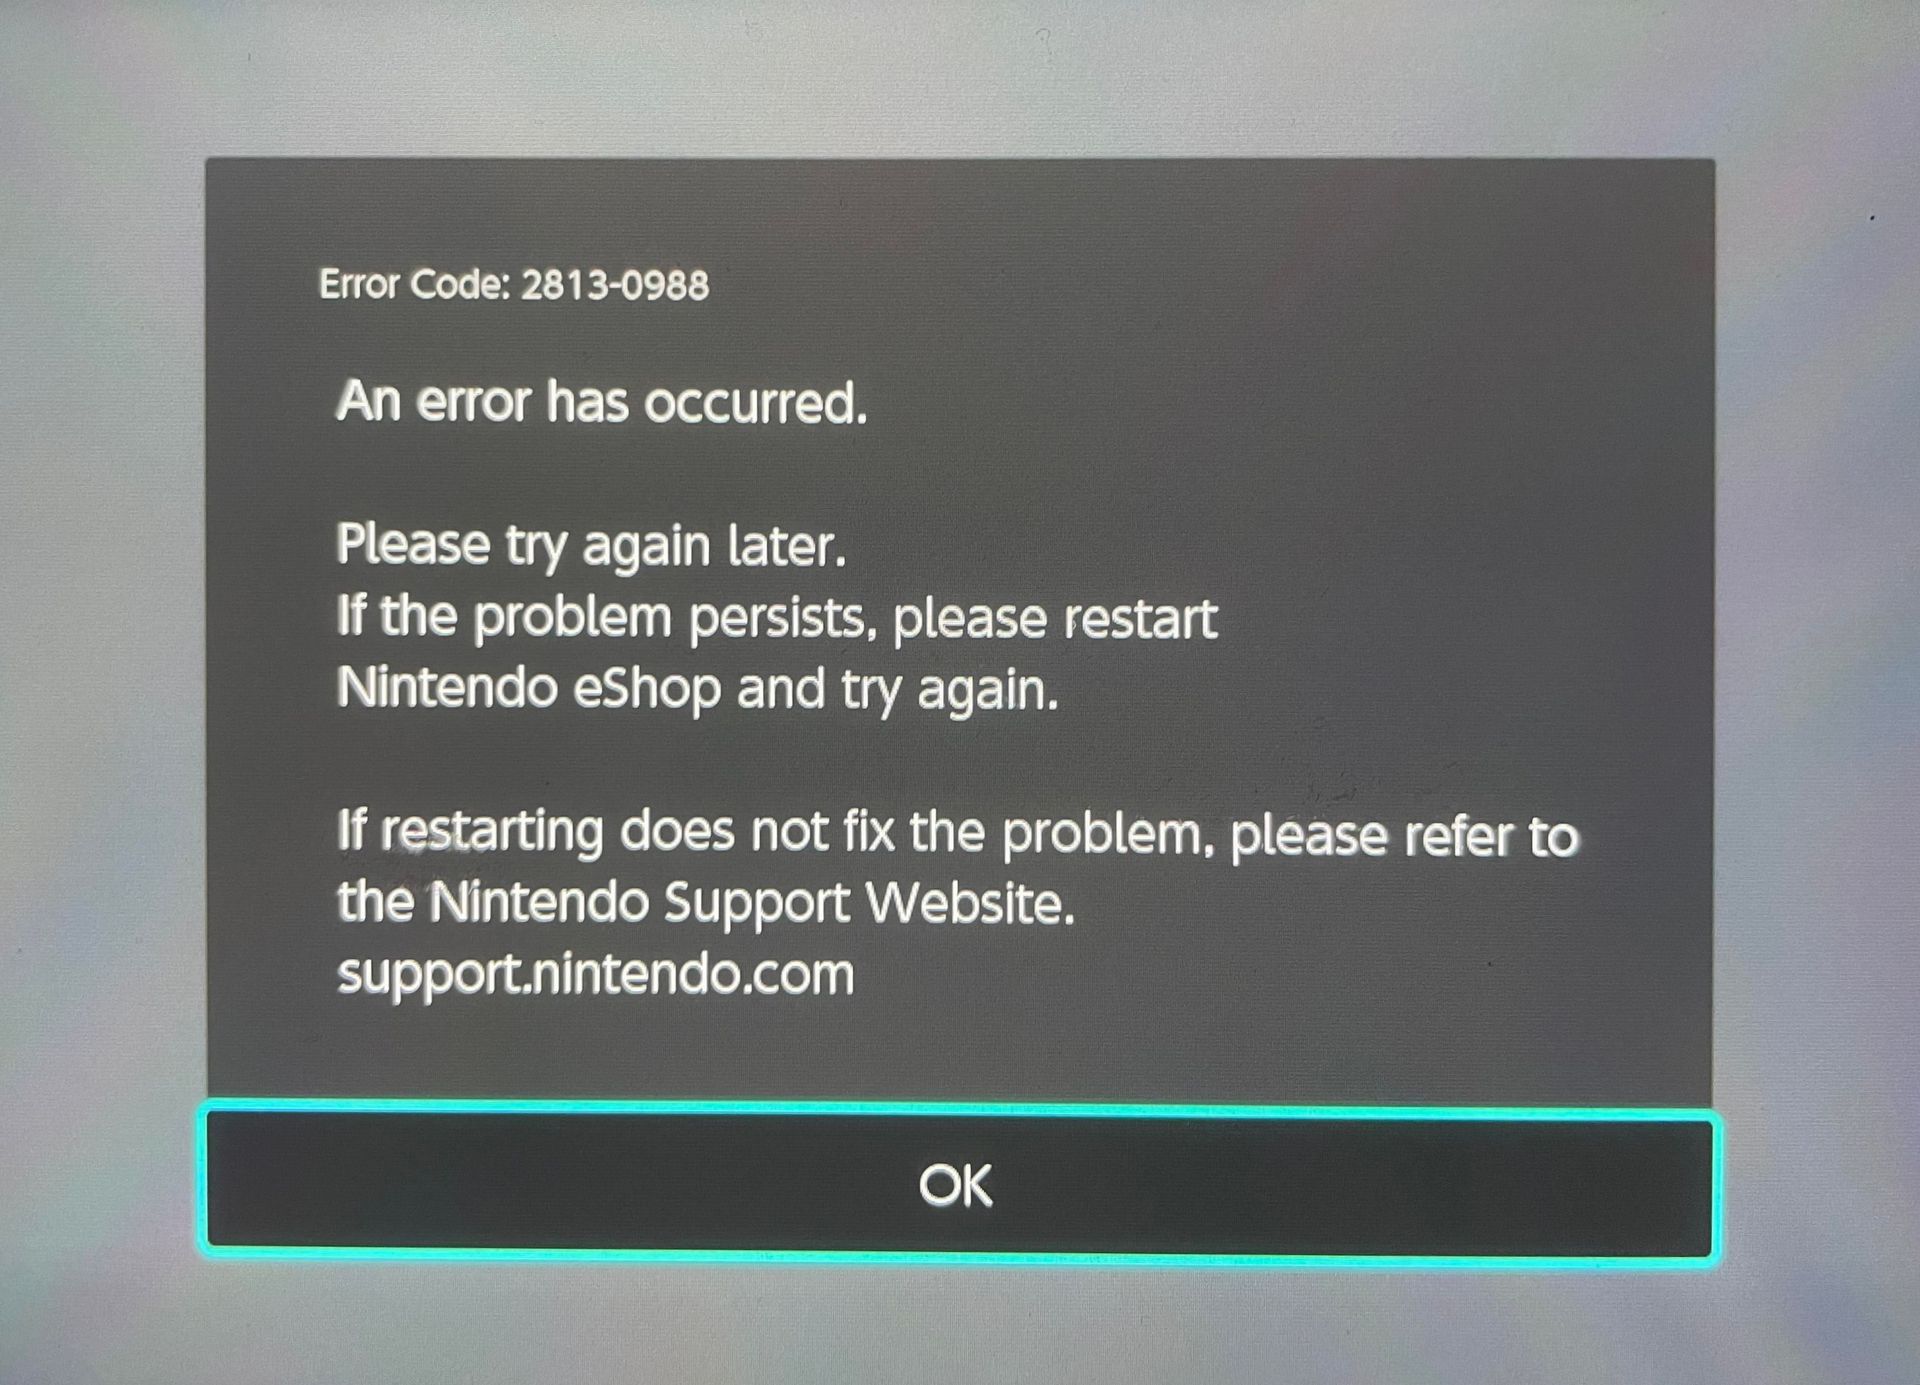 If you want to learn how do I fix a Nintendo eShop error, which is the Nintendo Switch error code 2813-0988, you have come to the right place.